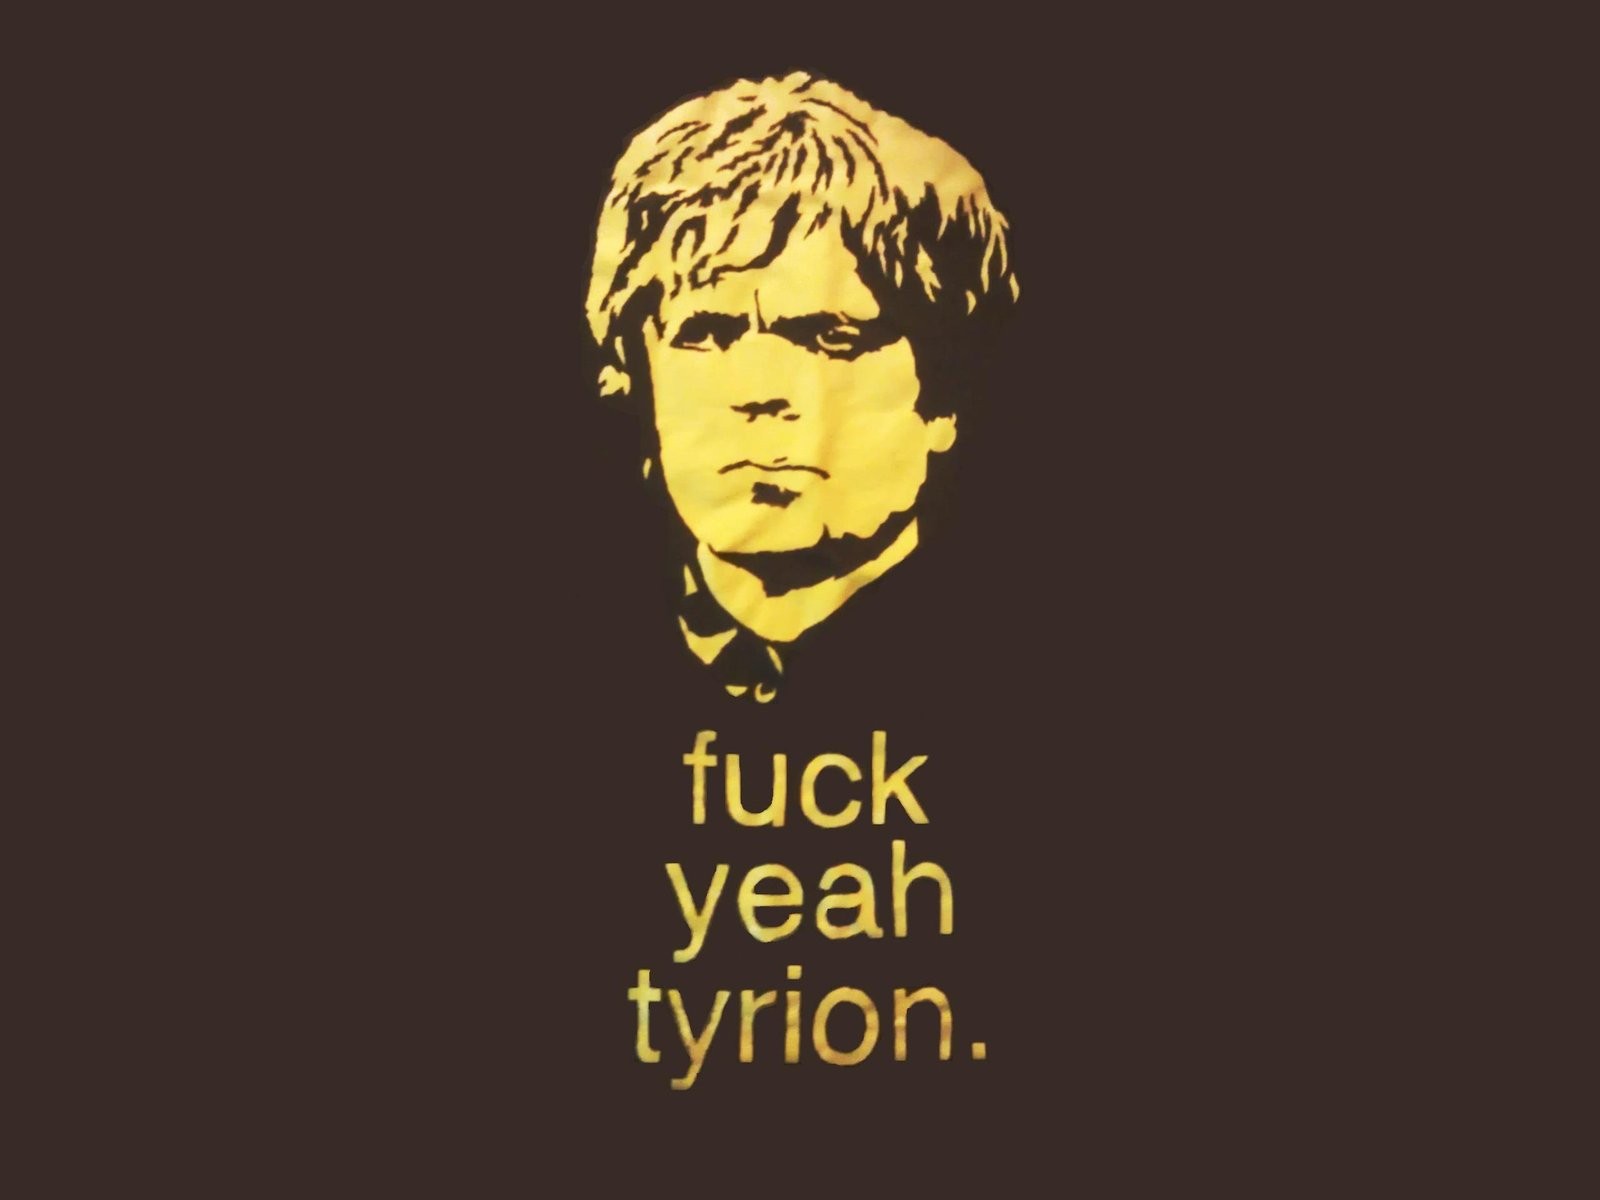 General 1600x1200 Tyrion Lannister memes fuck humor yellow Game of Thrones TV series brown background simple background typography